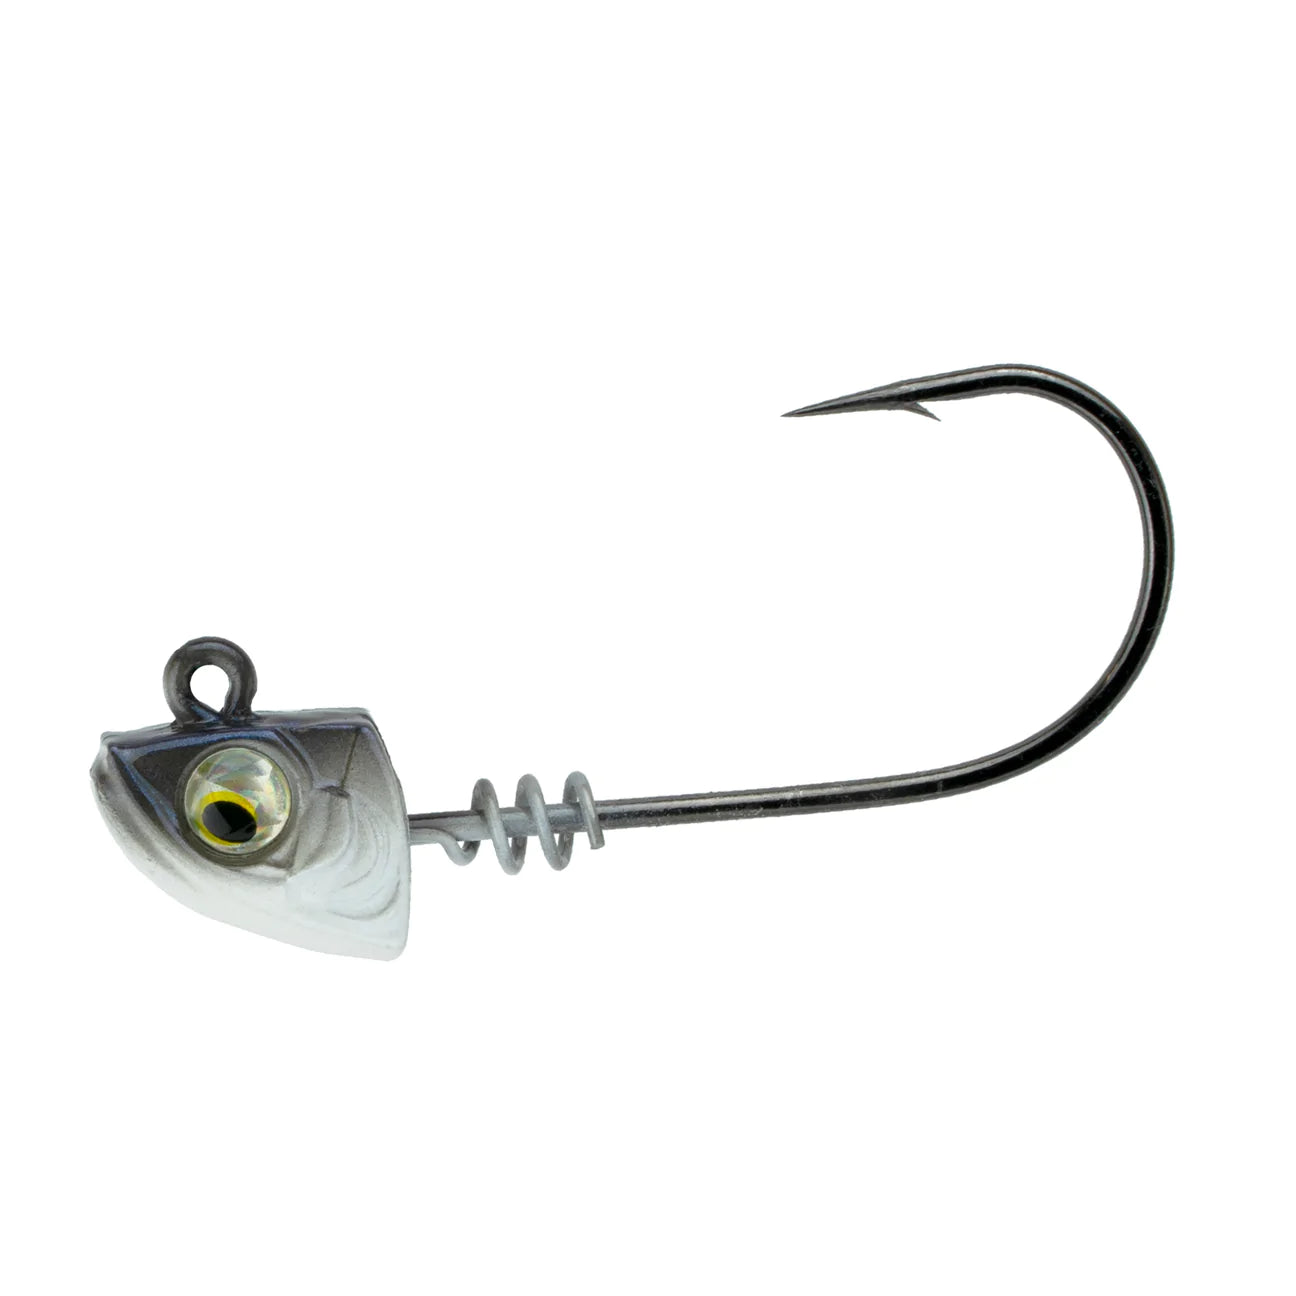 https://cdn.shopify.com/s/files/1/0379/5648/5165/products/baby_shad_jig_head_1296x_3e77bca3-20cf-4ec6-a076-5ff3ad5e0a8f.webp?v=1662561230&width=1296